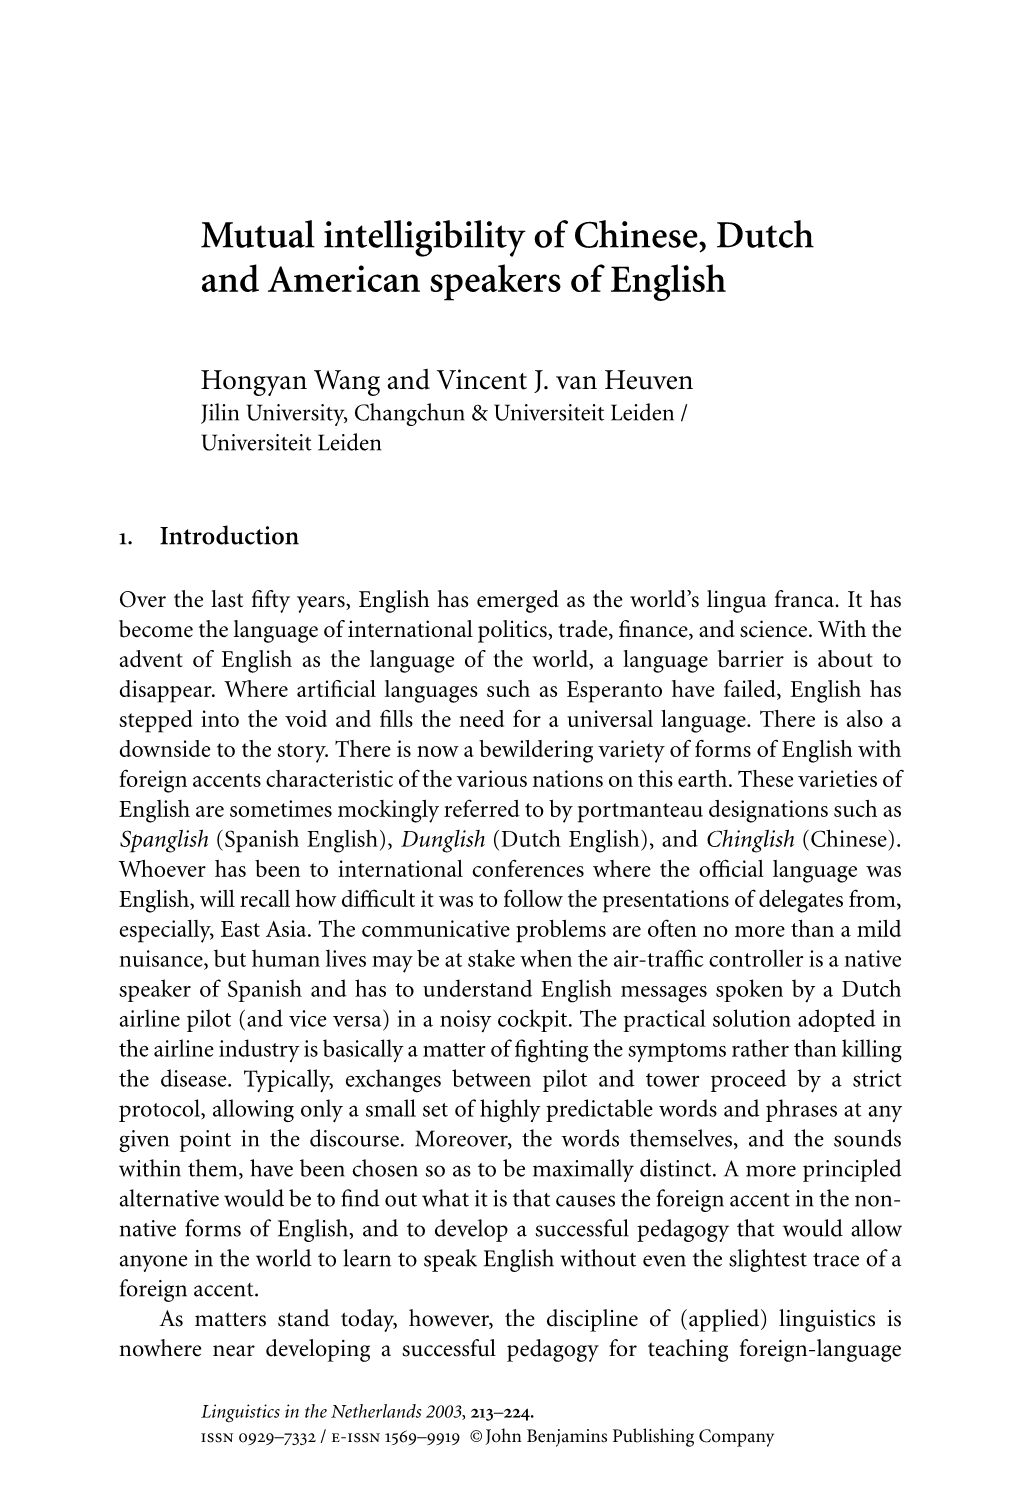 Mutual Intelligibility of Chinese, Dutch and American Speakers of English"SUBJECT "AVT, Volume 20 (2003)"KEYWORDS ""SIZE HEIGHT "220"WIDTH "150"VOFFSET "4">